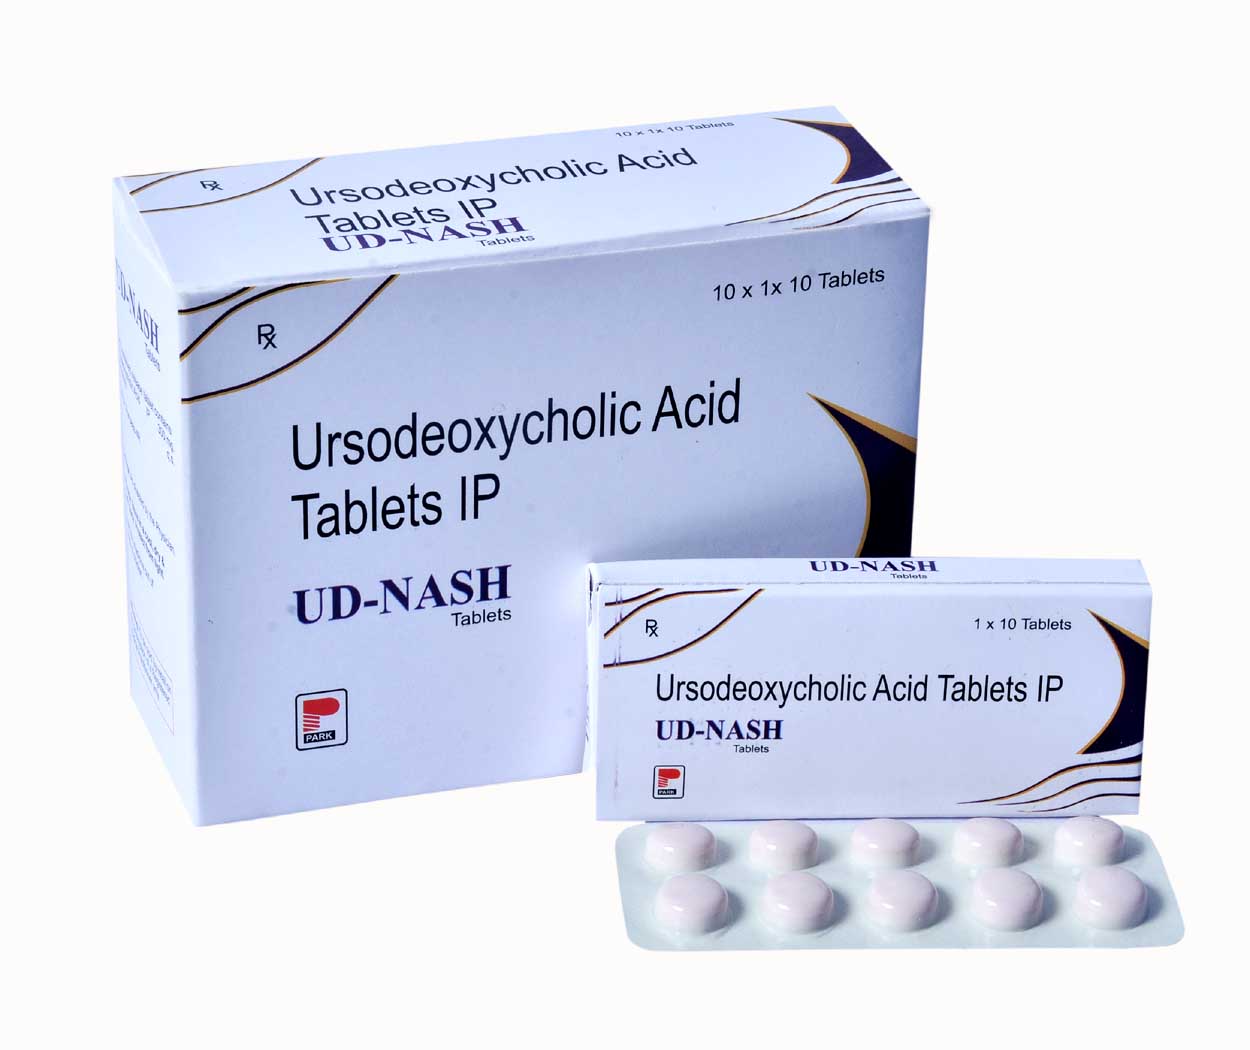 Product Name: UD NASH, Compositions of UD NASH are Ursodeoxycholic Acid Tablets IP - Park Pharmaceuticals